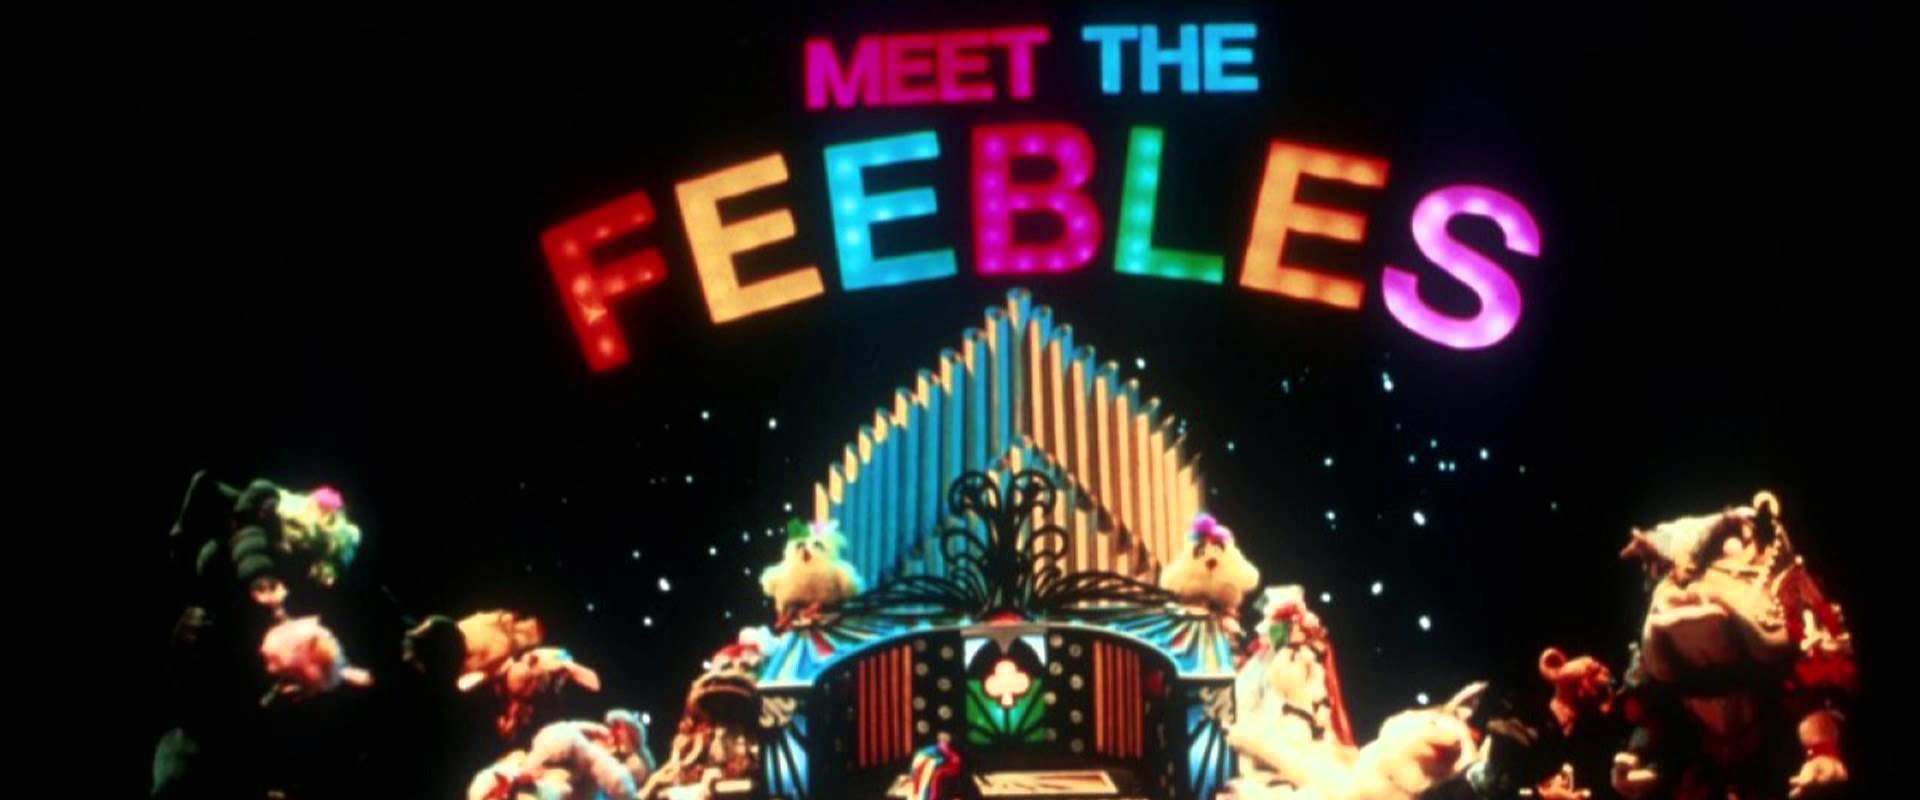 Meet the Feebles background 2